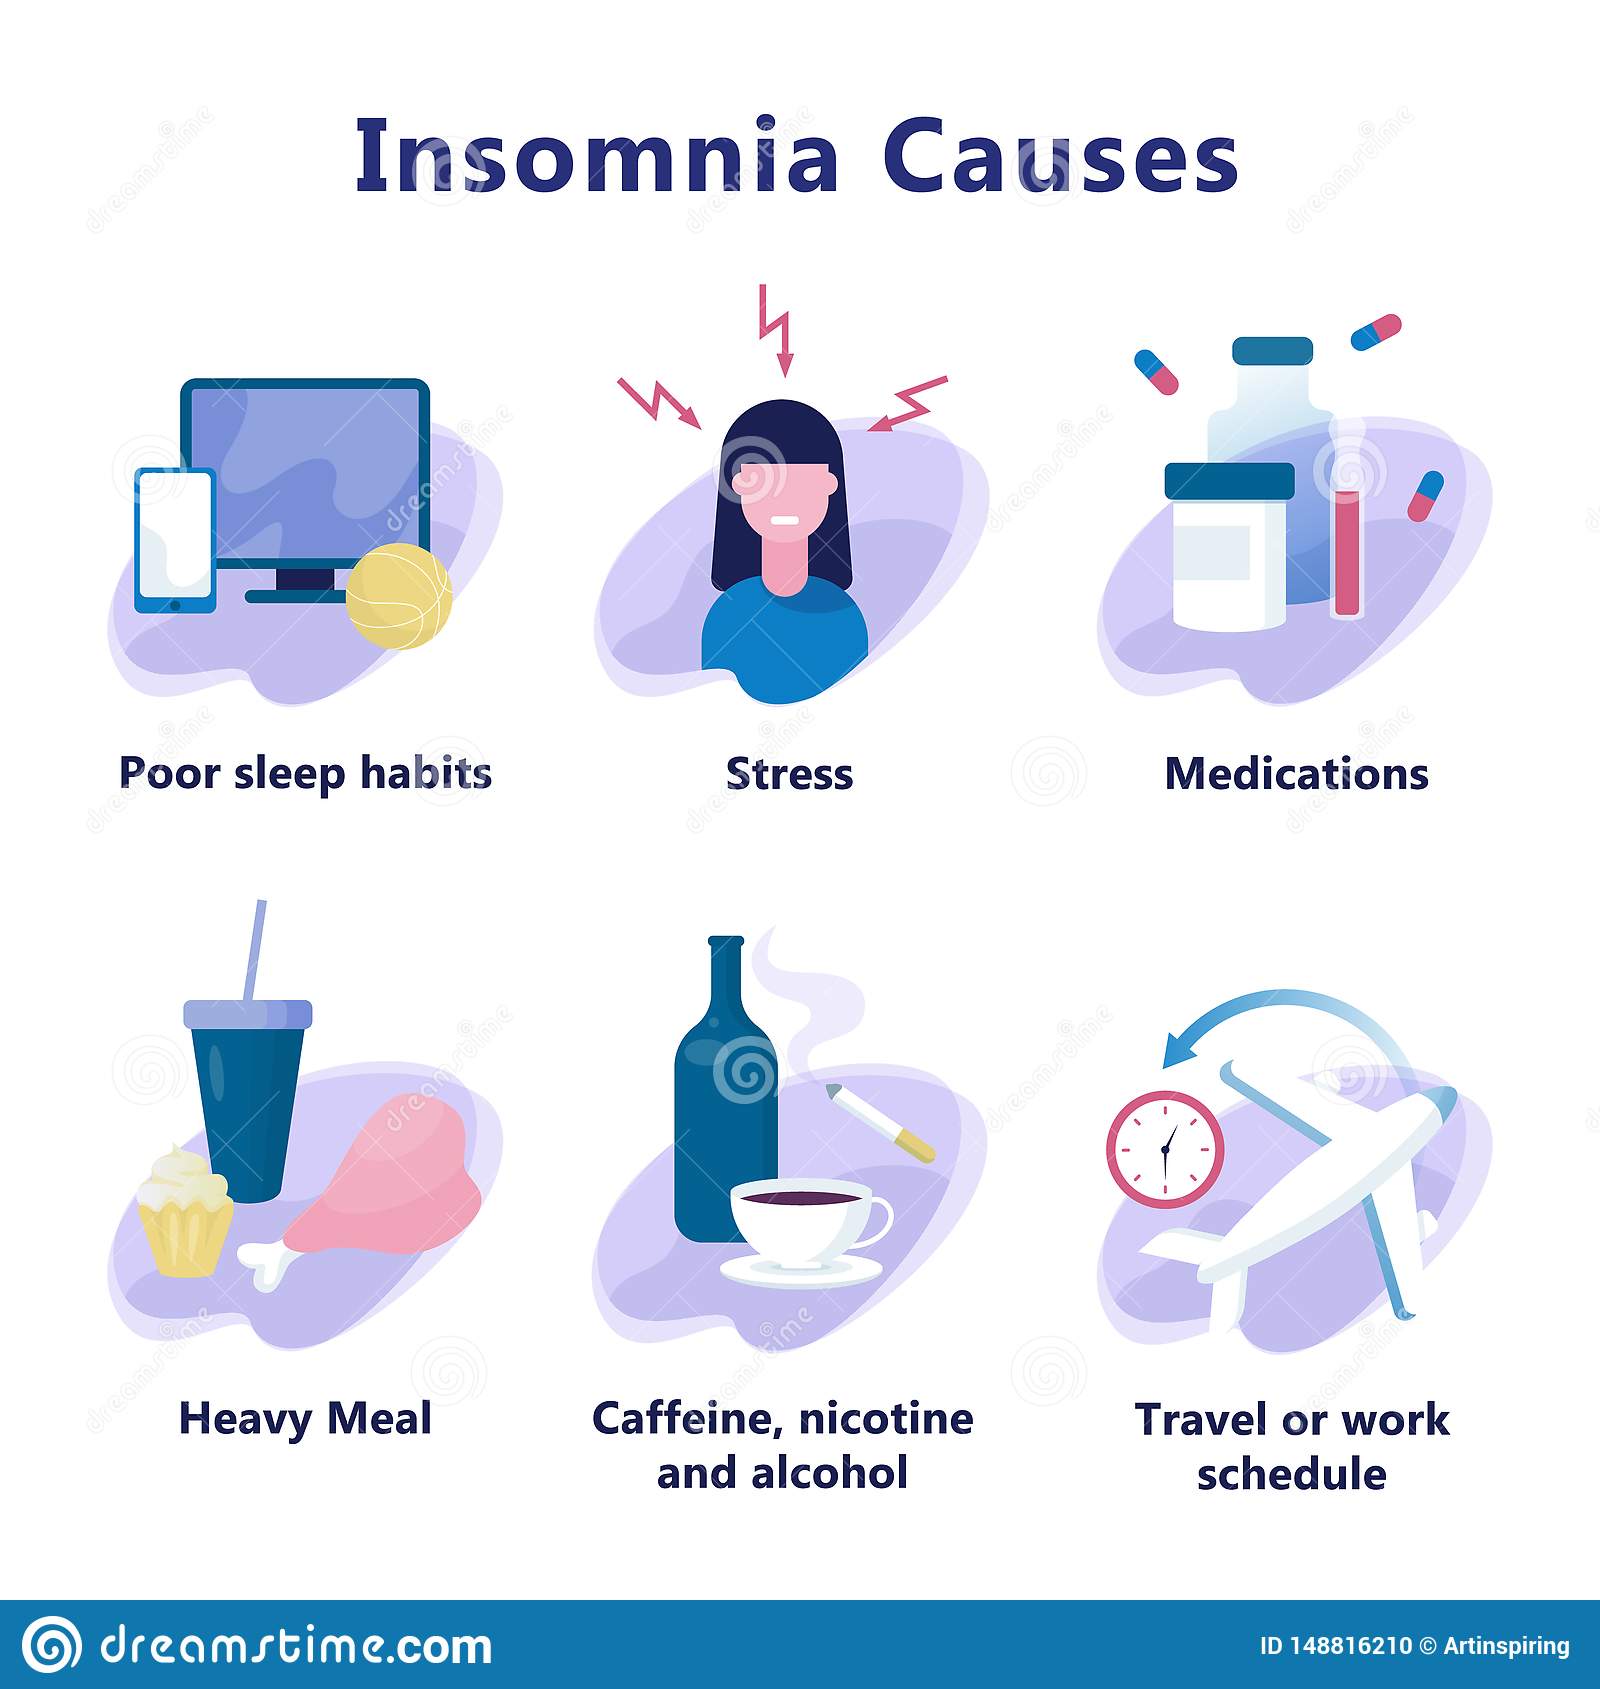 Can Insomnia Cause Depression And Anxiety